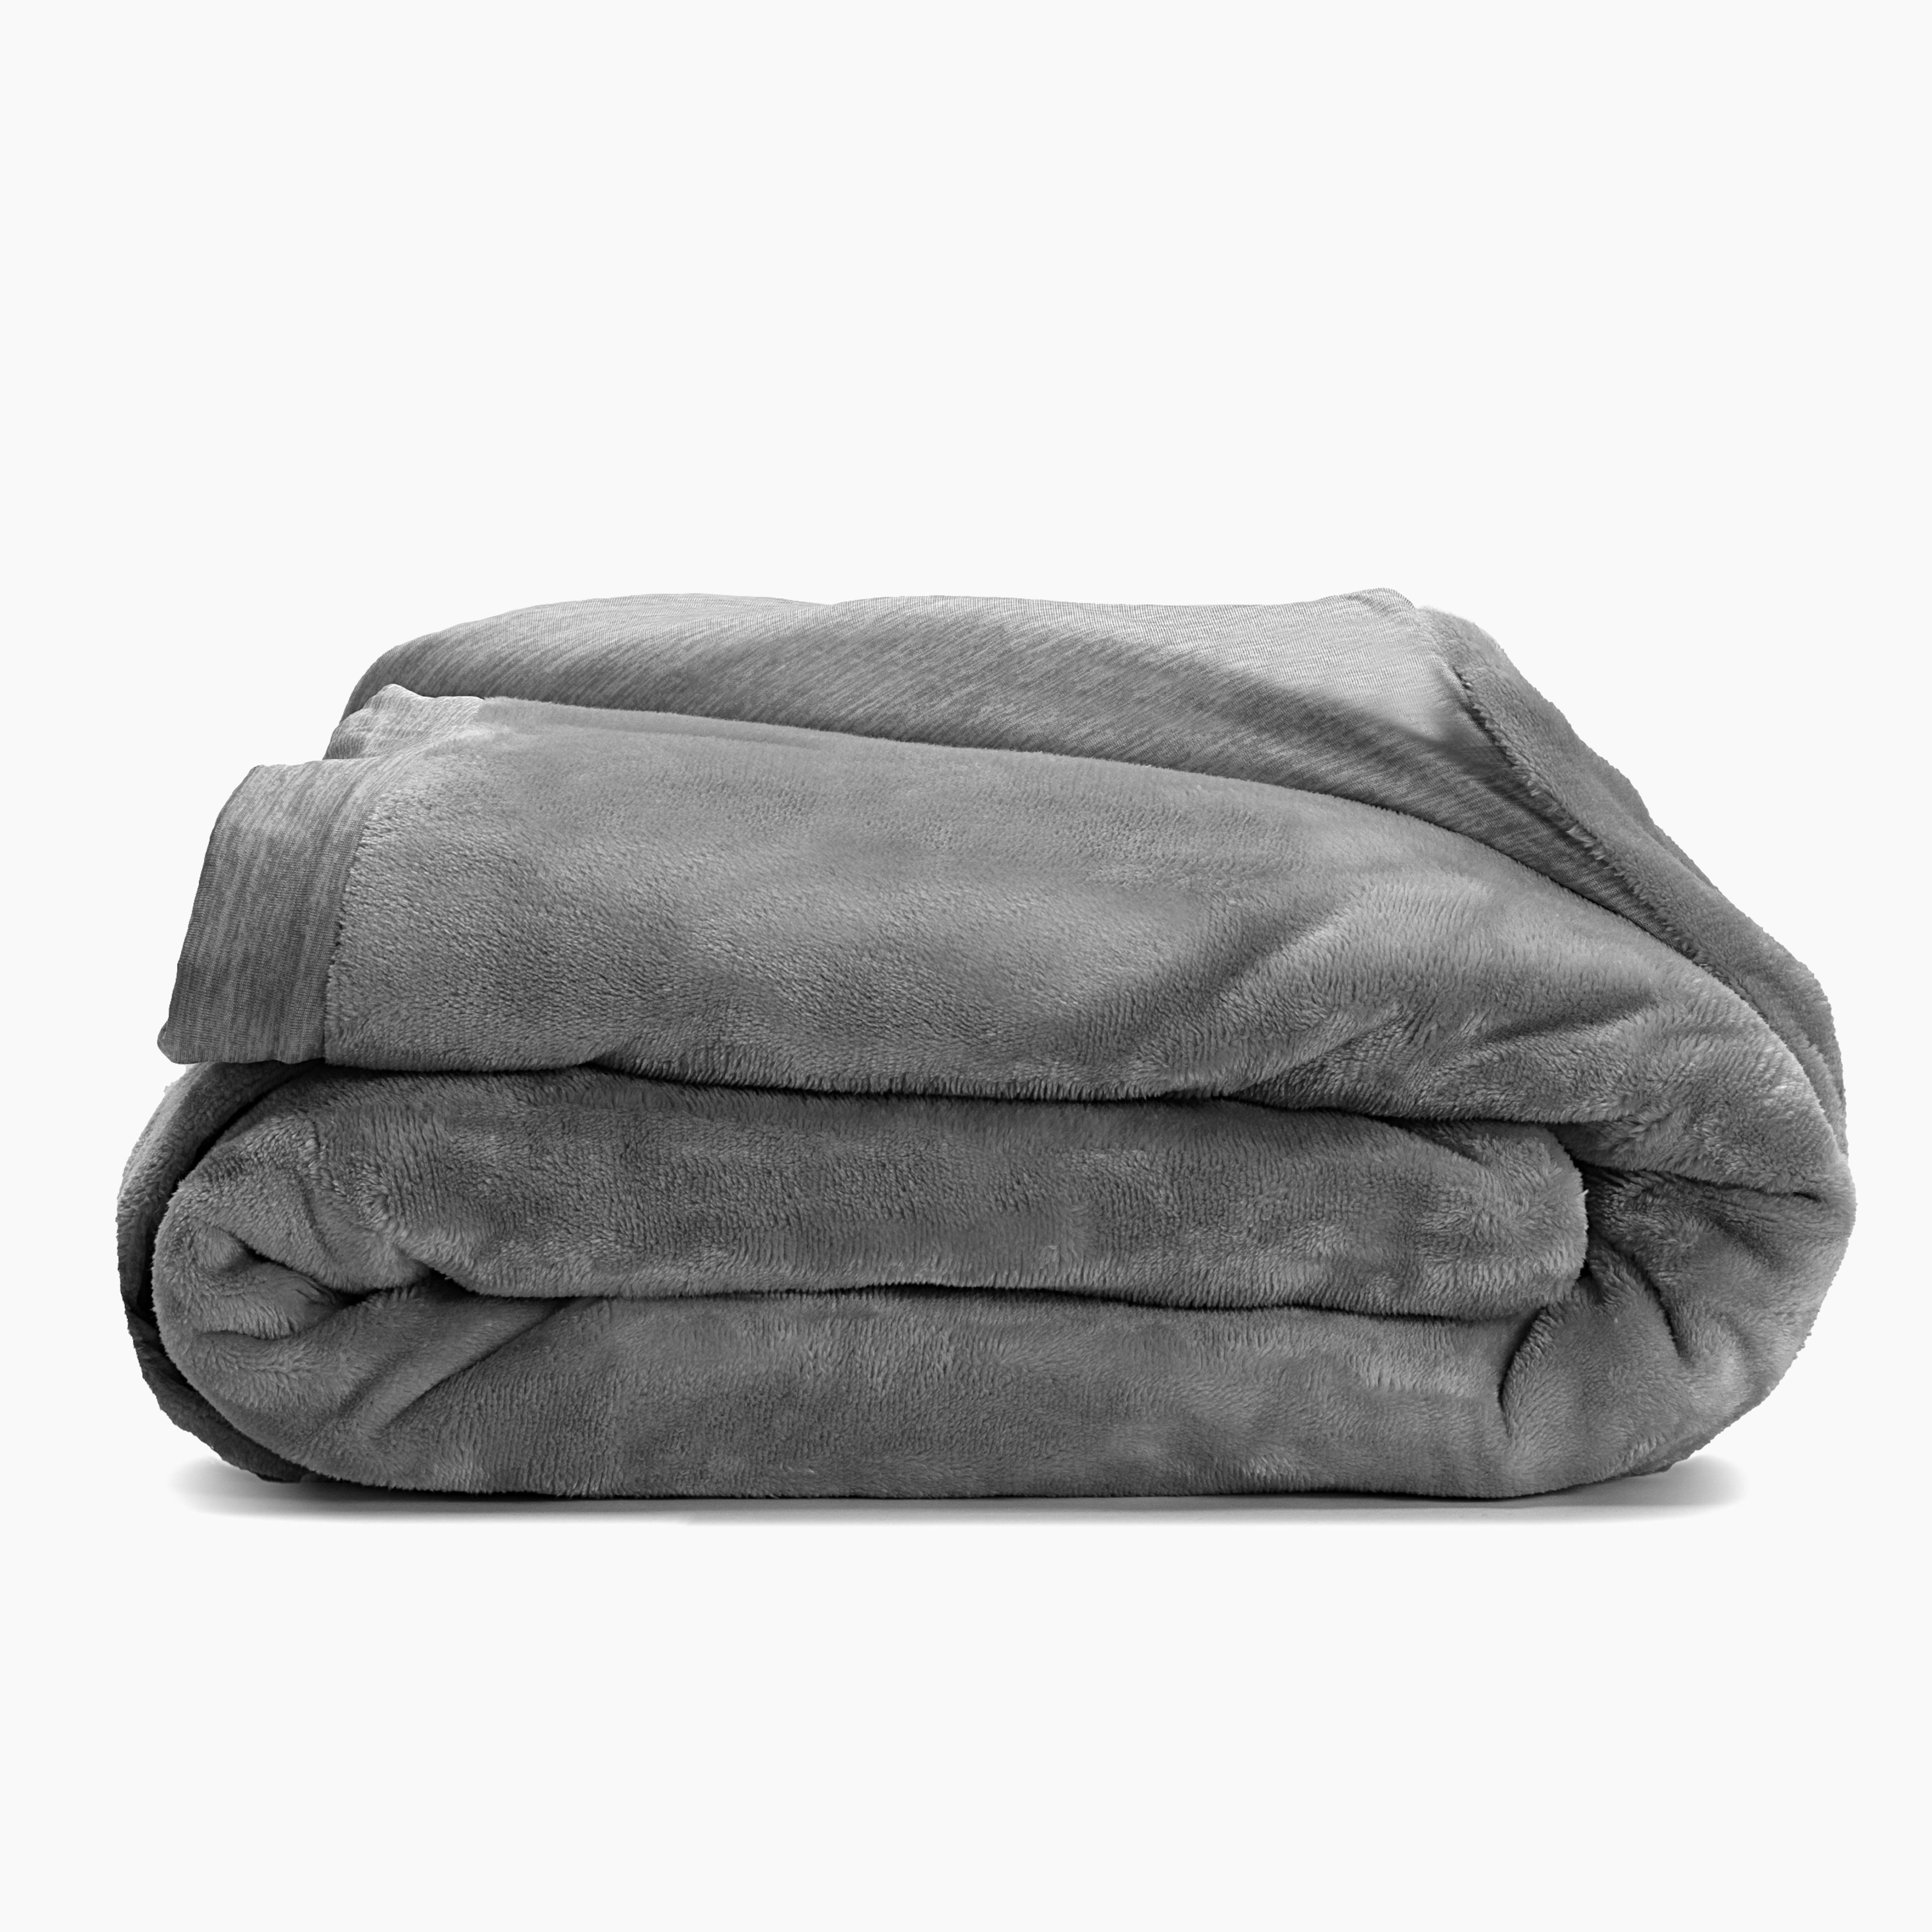 Cooling Minky Weighted Blanket & Duvet Cover Bundle